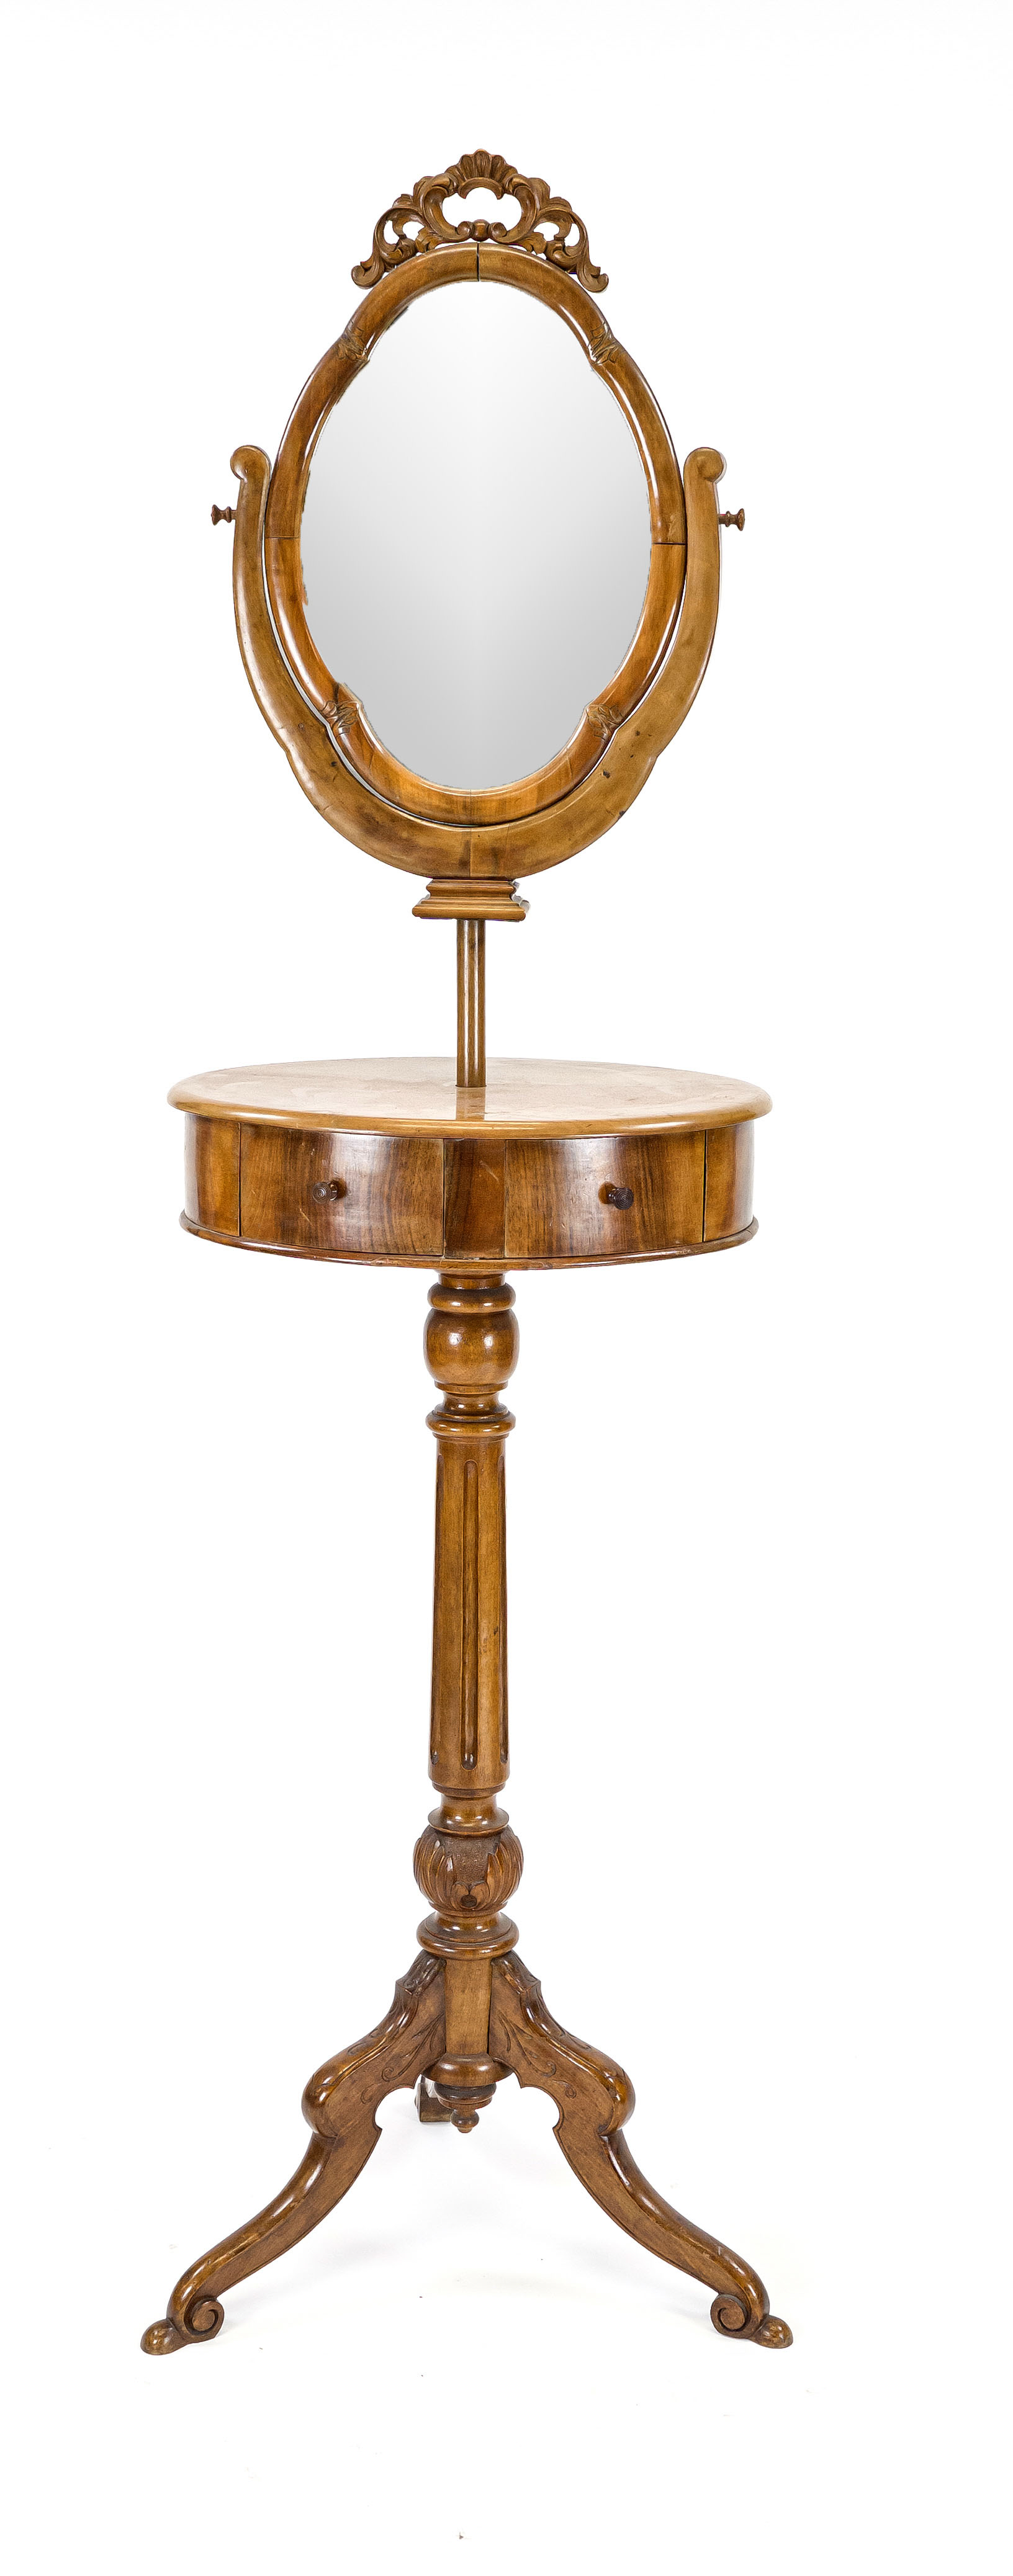 Psyche/dressing table, 19th century, mahogany, tall shaft on three volute feet, oval body with two